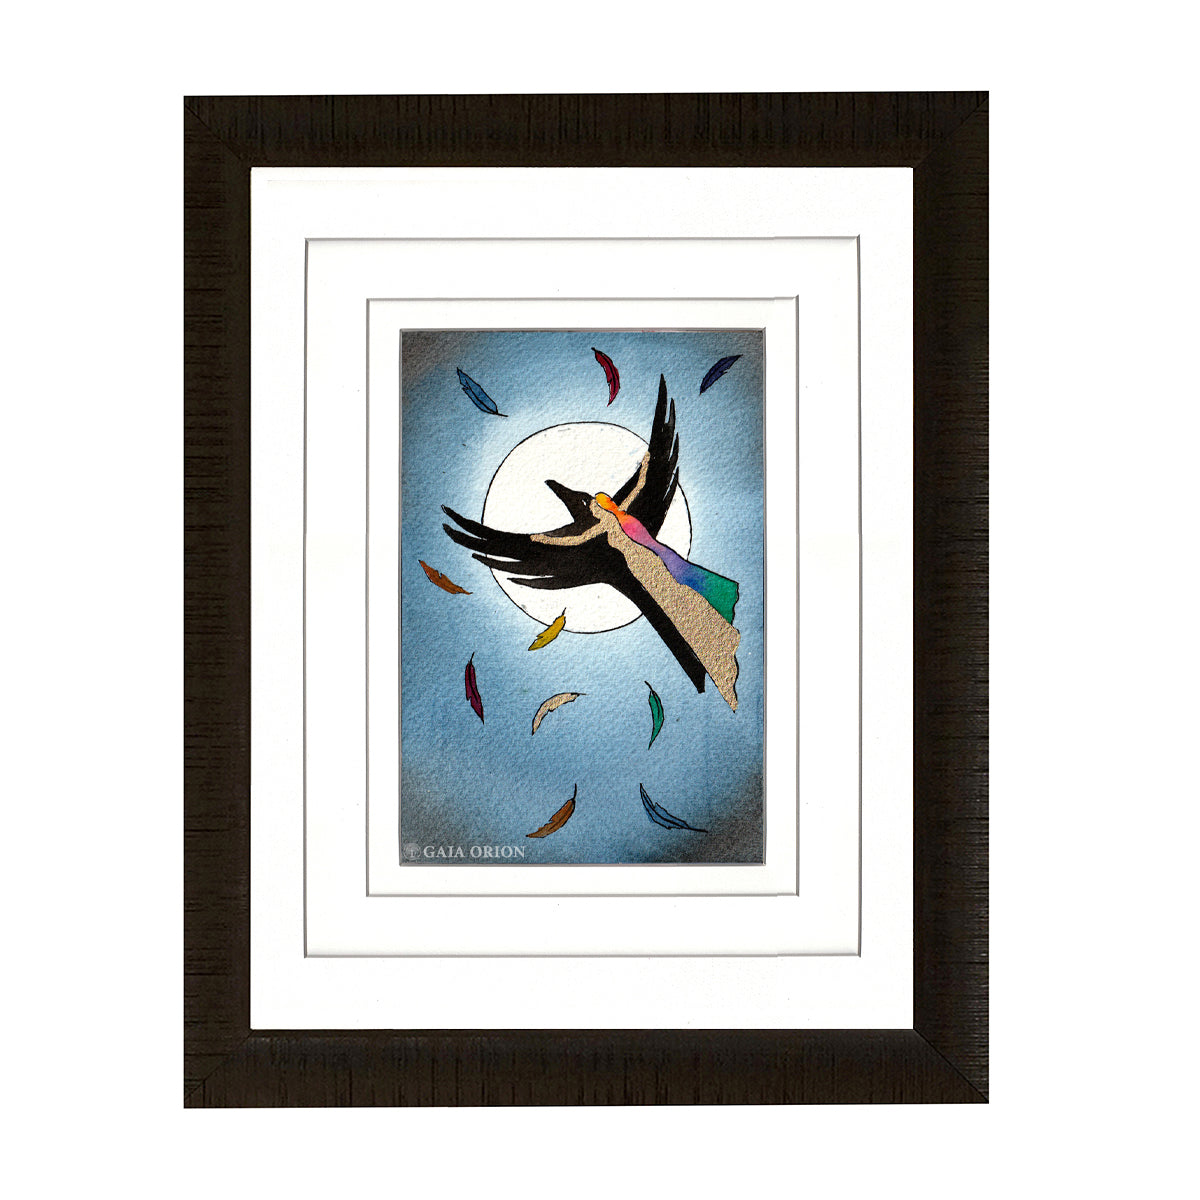 Framed painting of a gold woman riding a raven with feathers flying